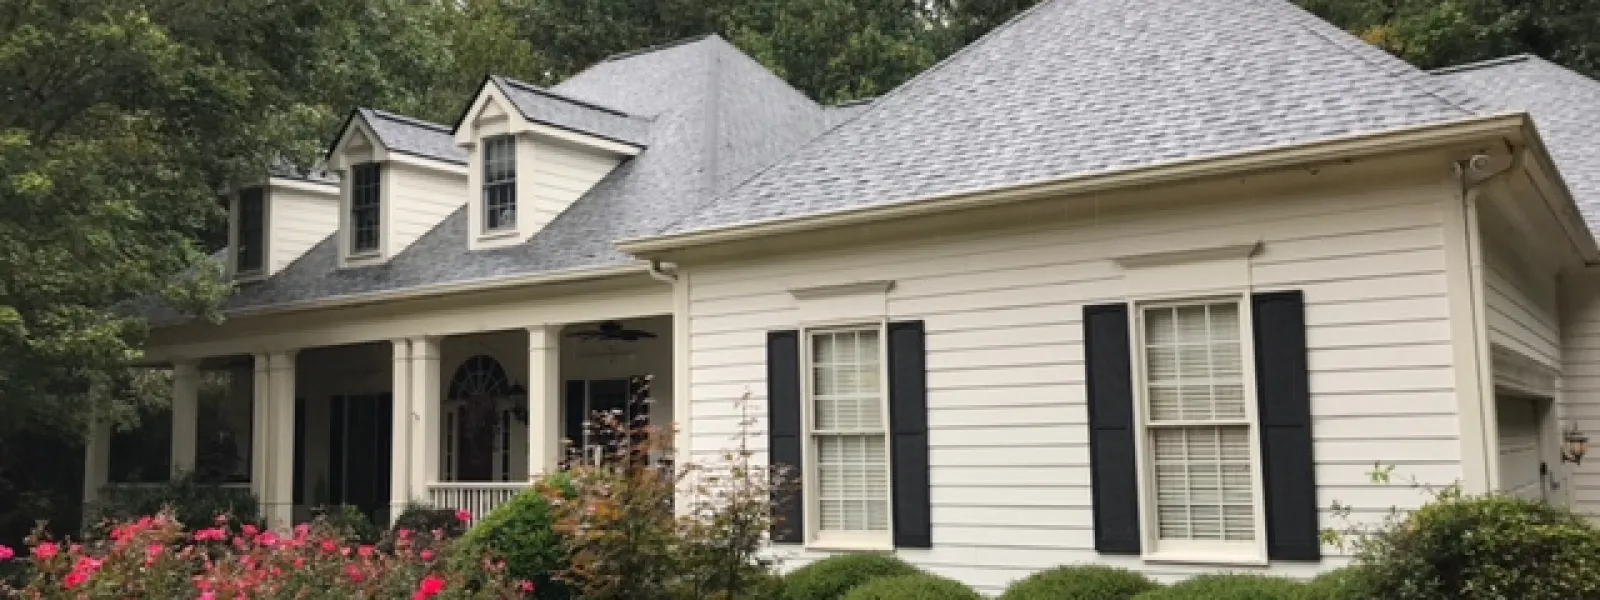 ARAC Roof It Forward - Full Roof Replacement in Kennesaw, Georgia